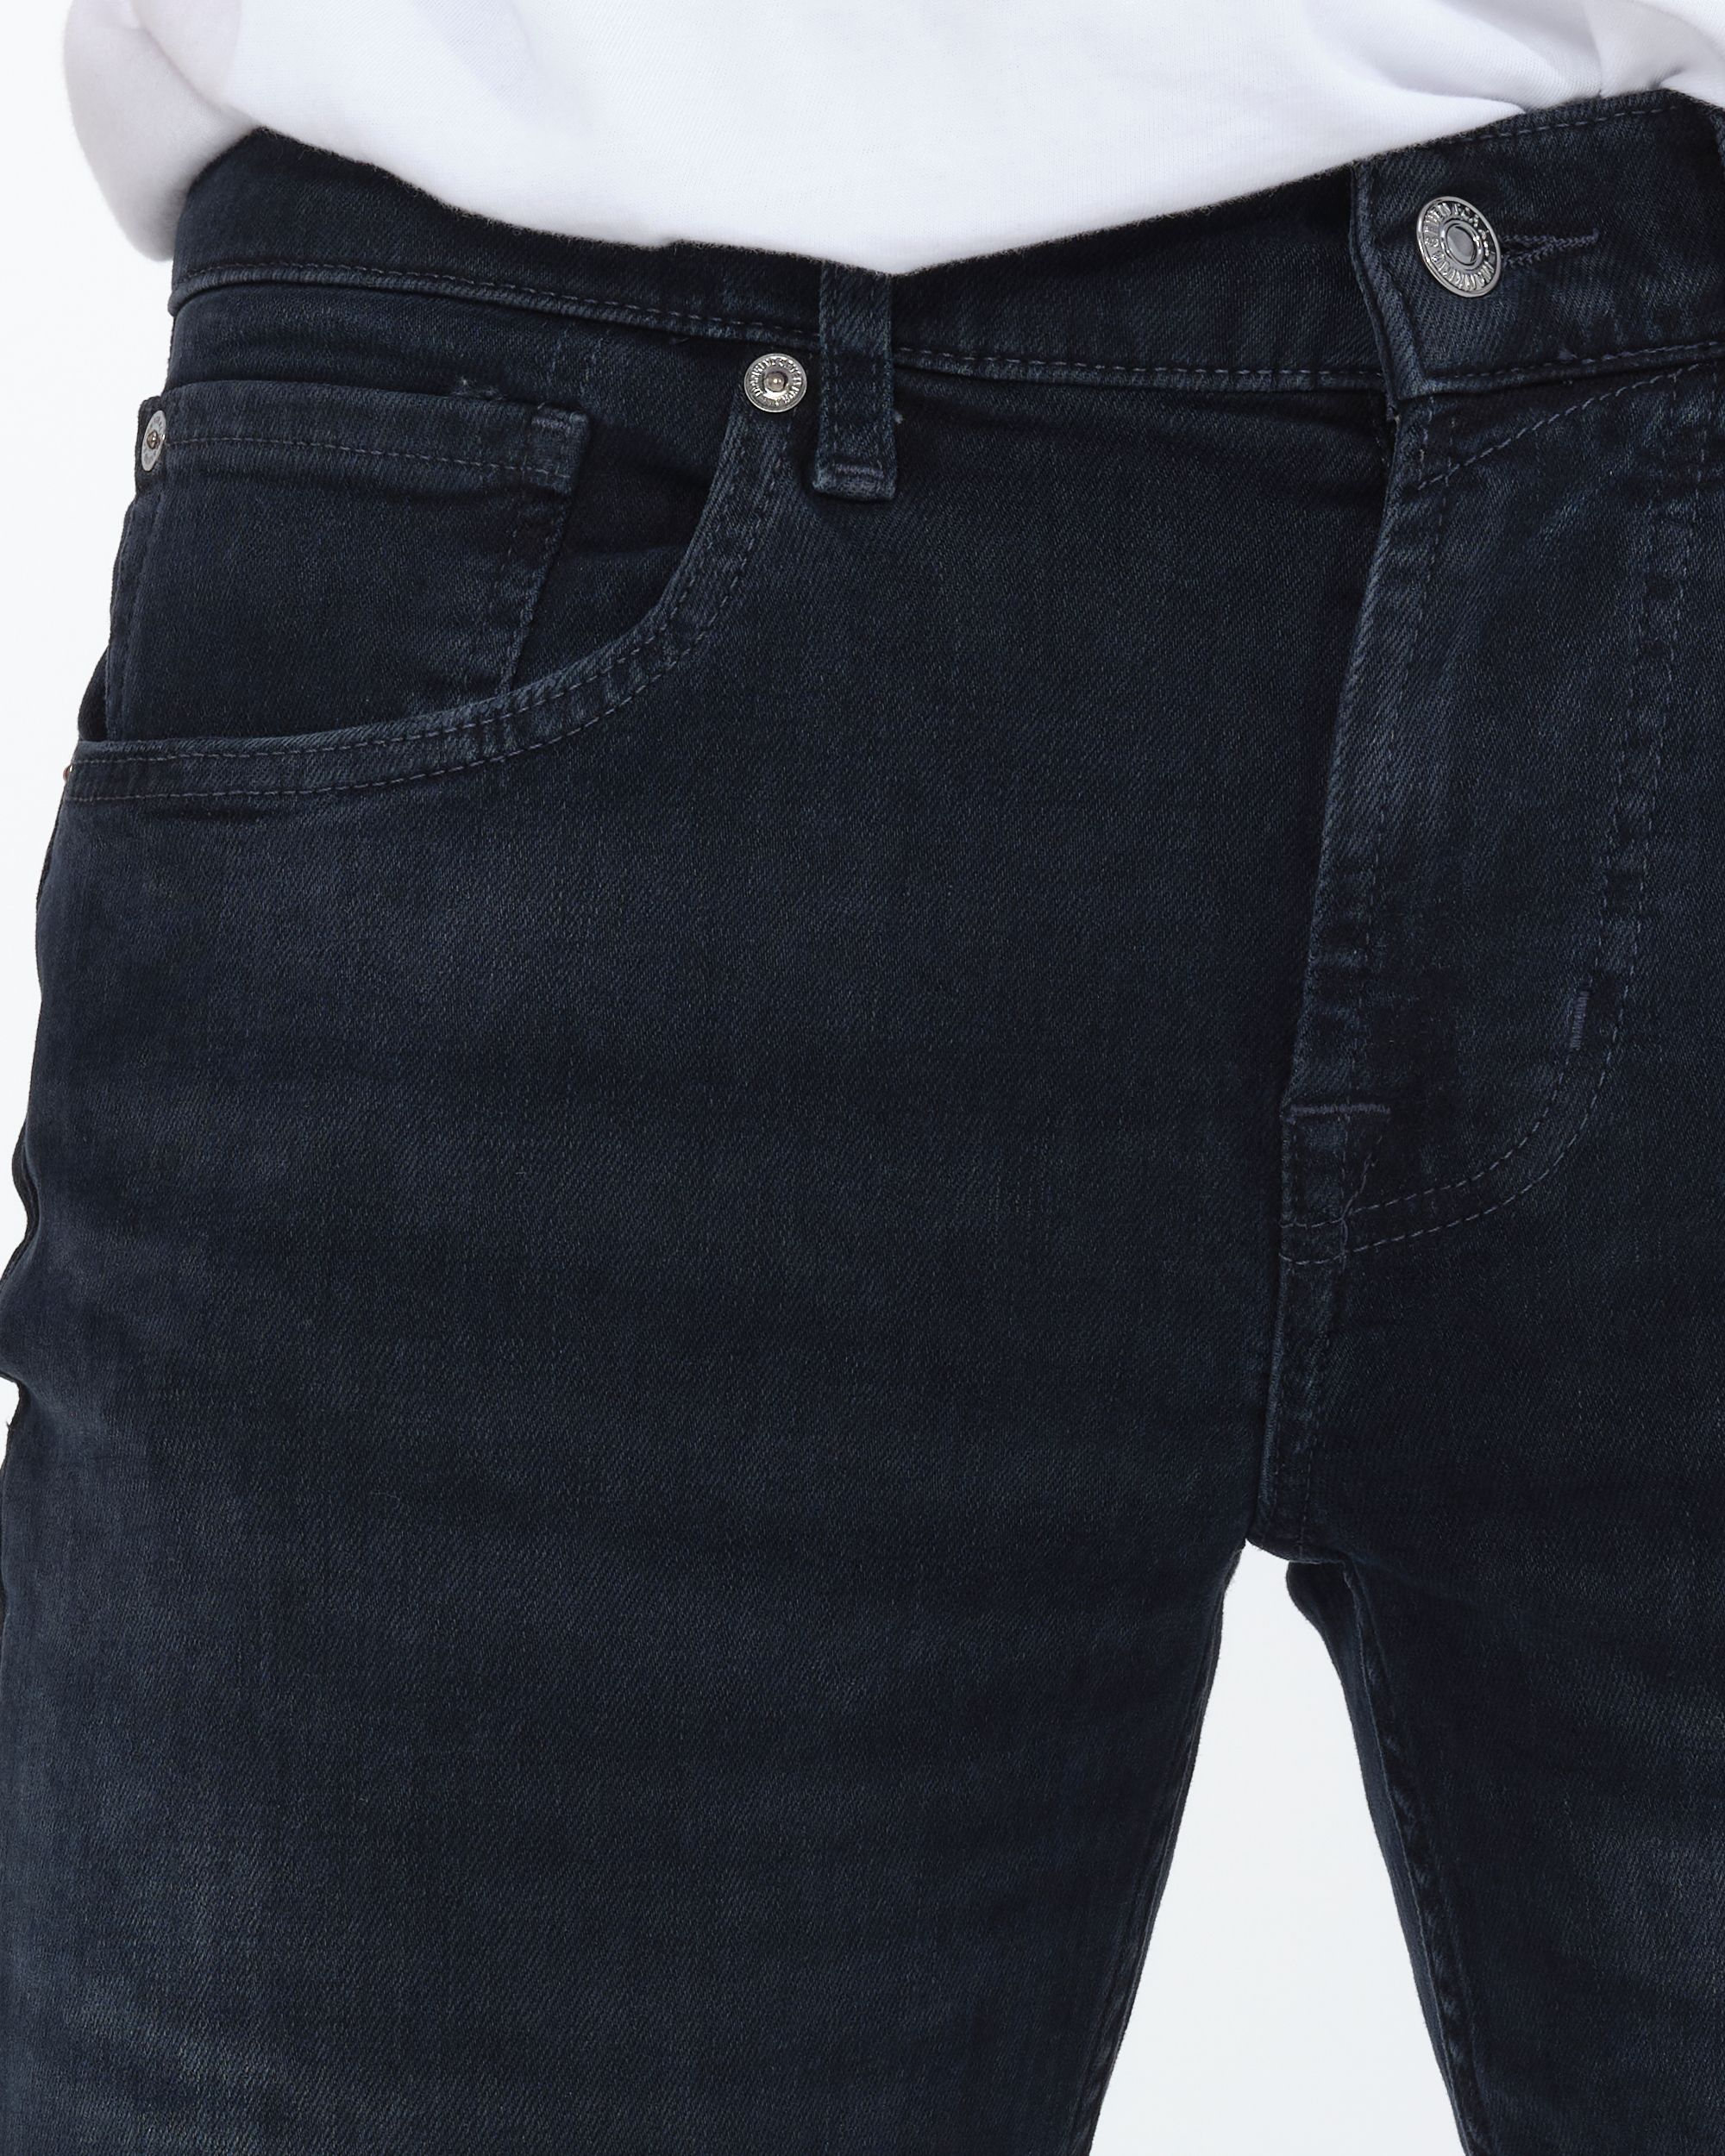 Seven for all mankind - Jeans Grijs 081446-001-30